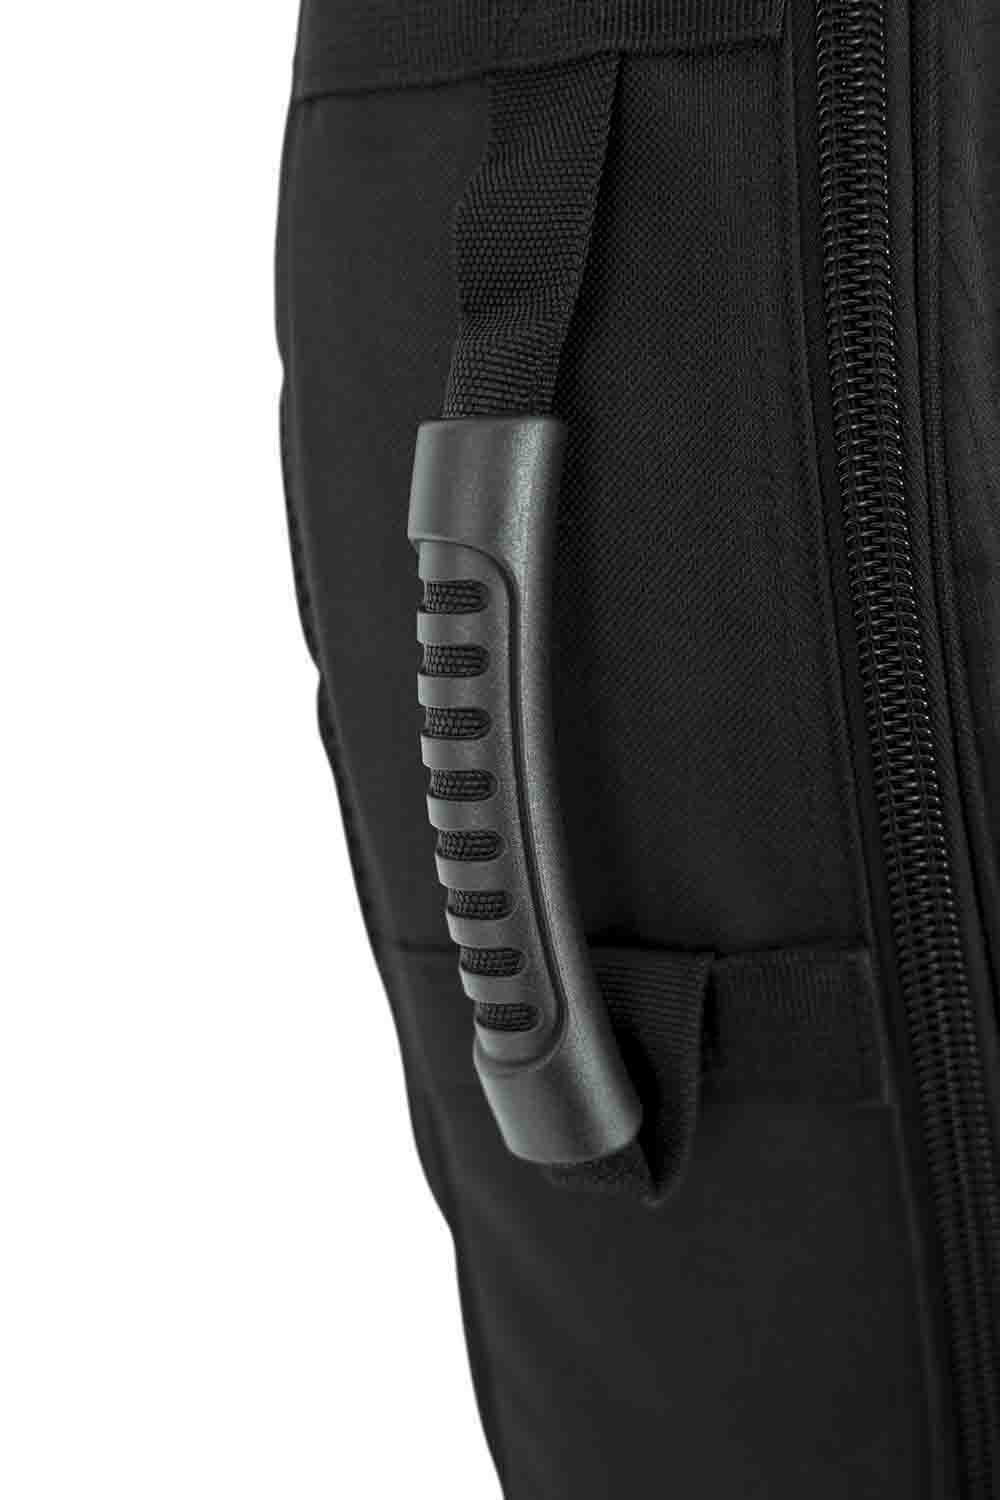 Gator Cases GB-4G-BASSX2 4G Style Gig Bag for 2 Bass Guitars with Adjustable Backpack Straps - Hollywood DJ